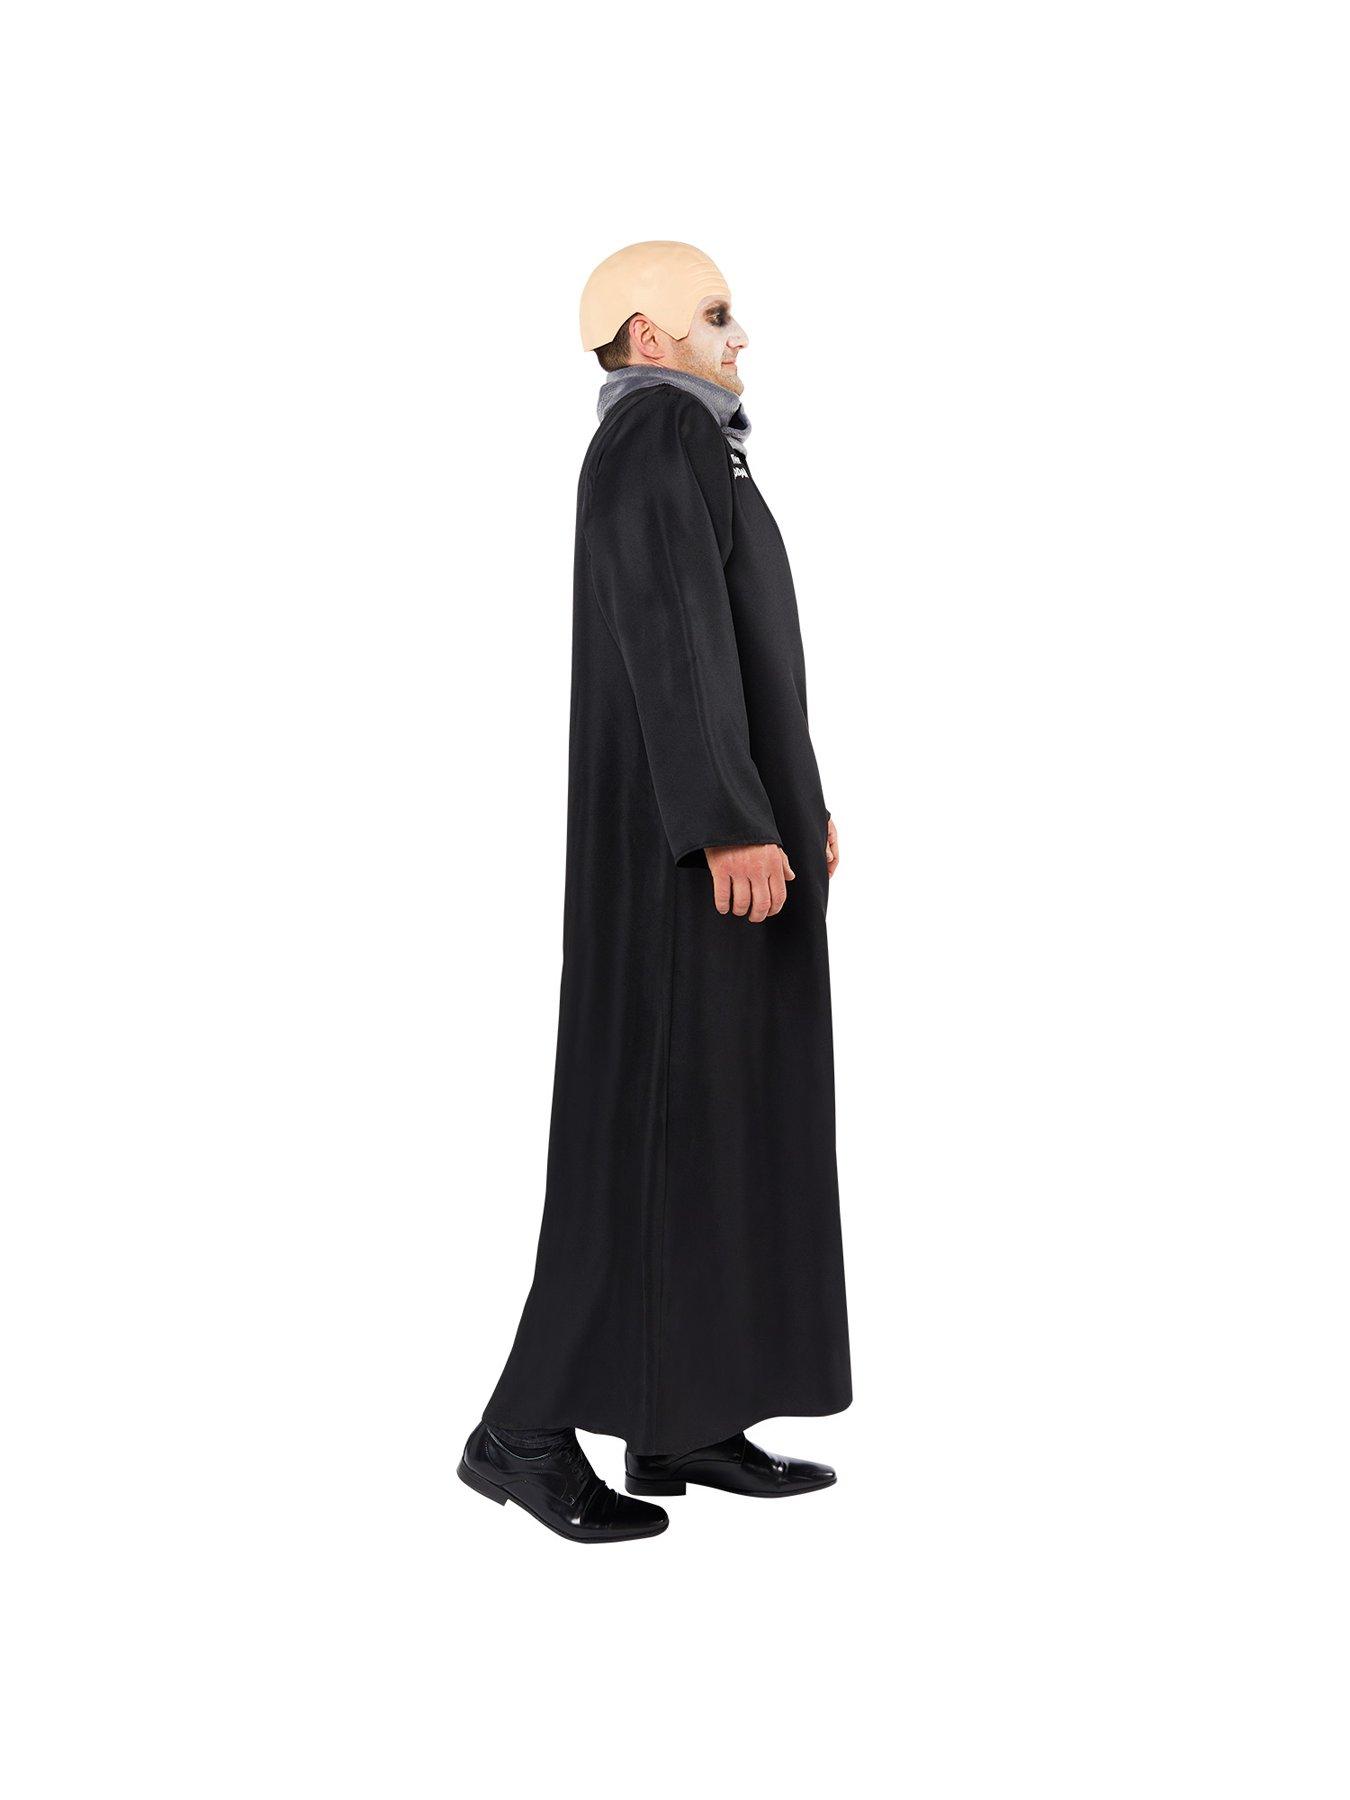 uncle fester costume